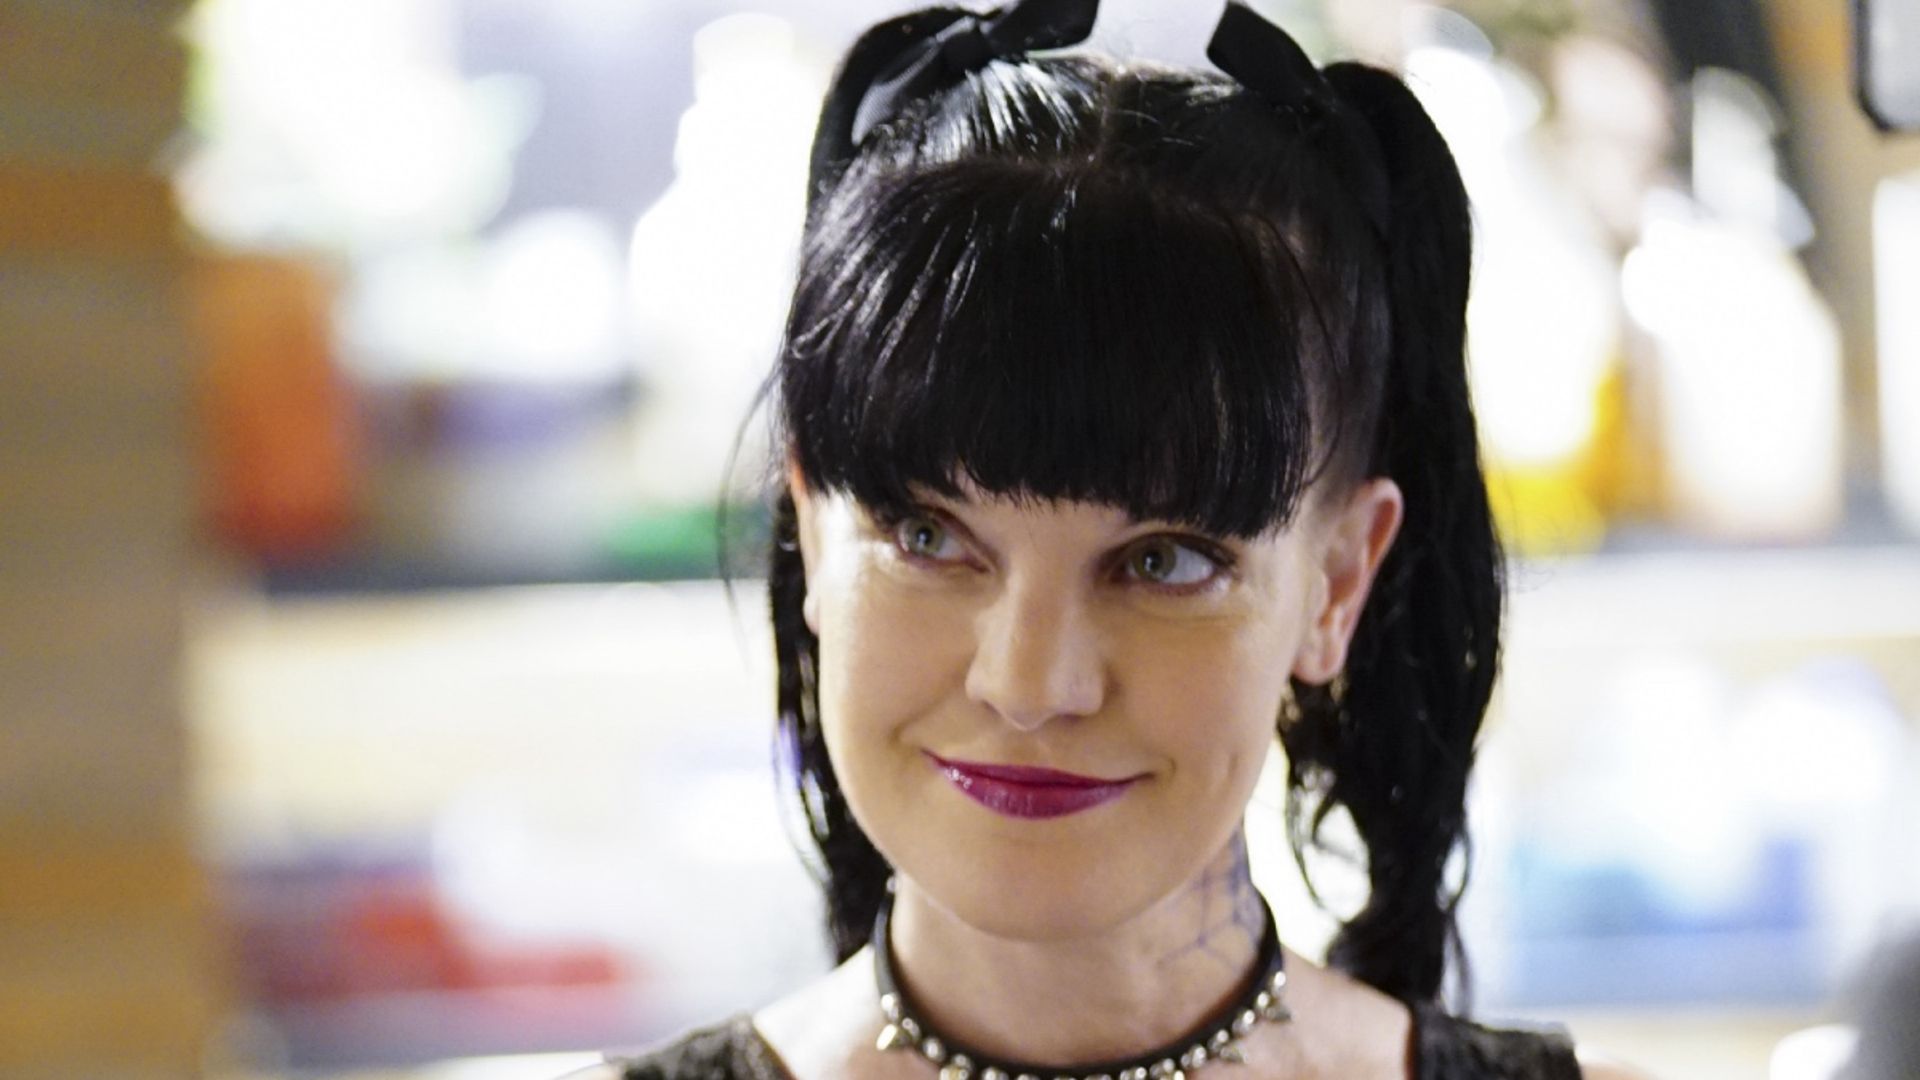 NCIS' Pauley Perrette shares adorable peek at her home life